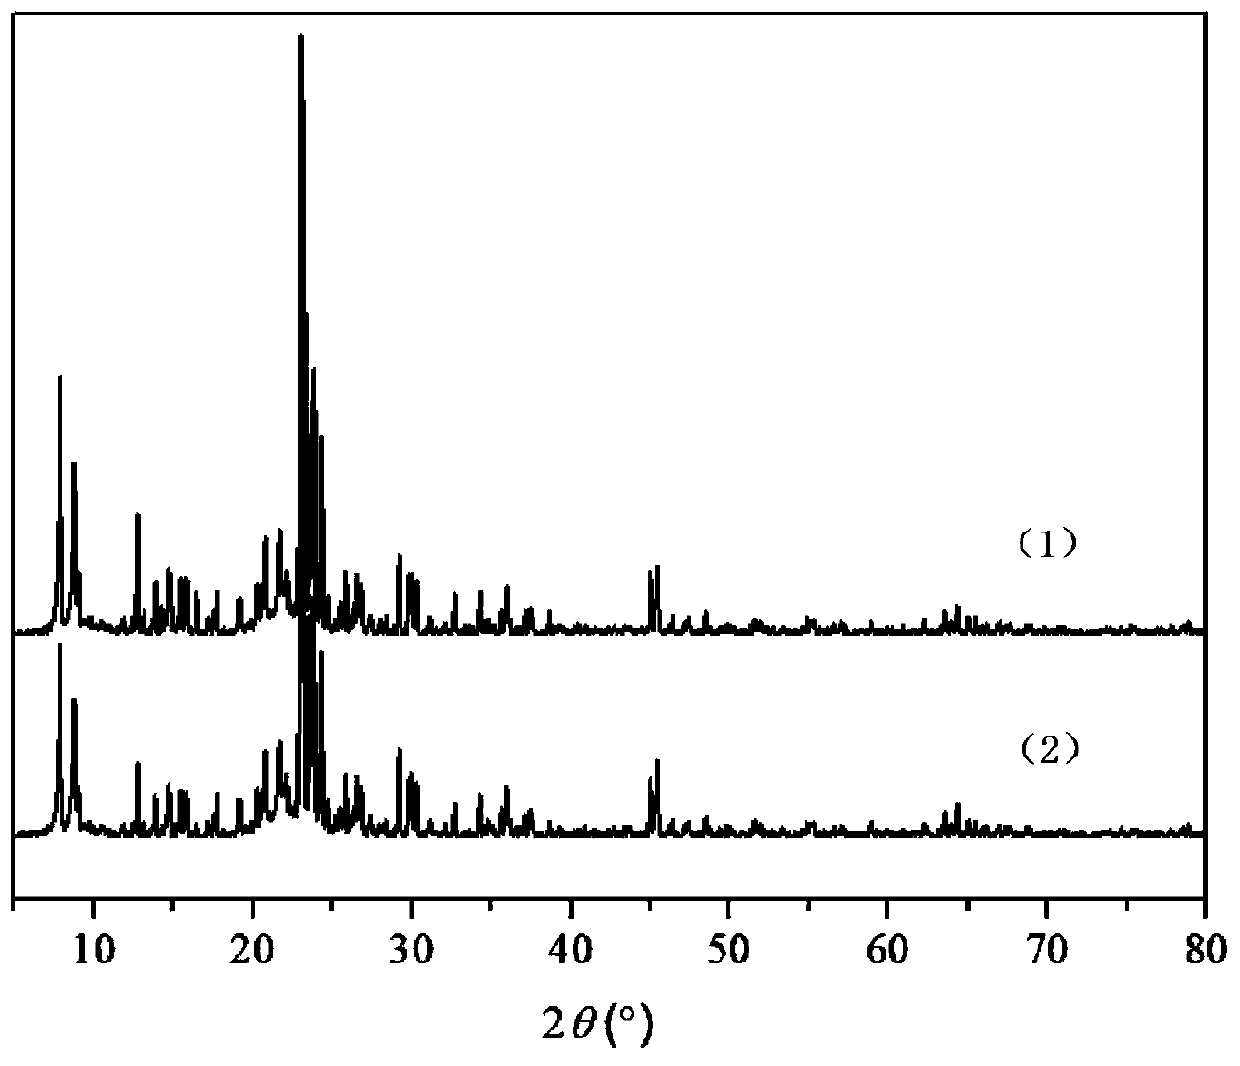 Method for synthesizing 1-butene-3, 4-diol through gas-solid phase continuous isomerization